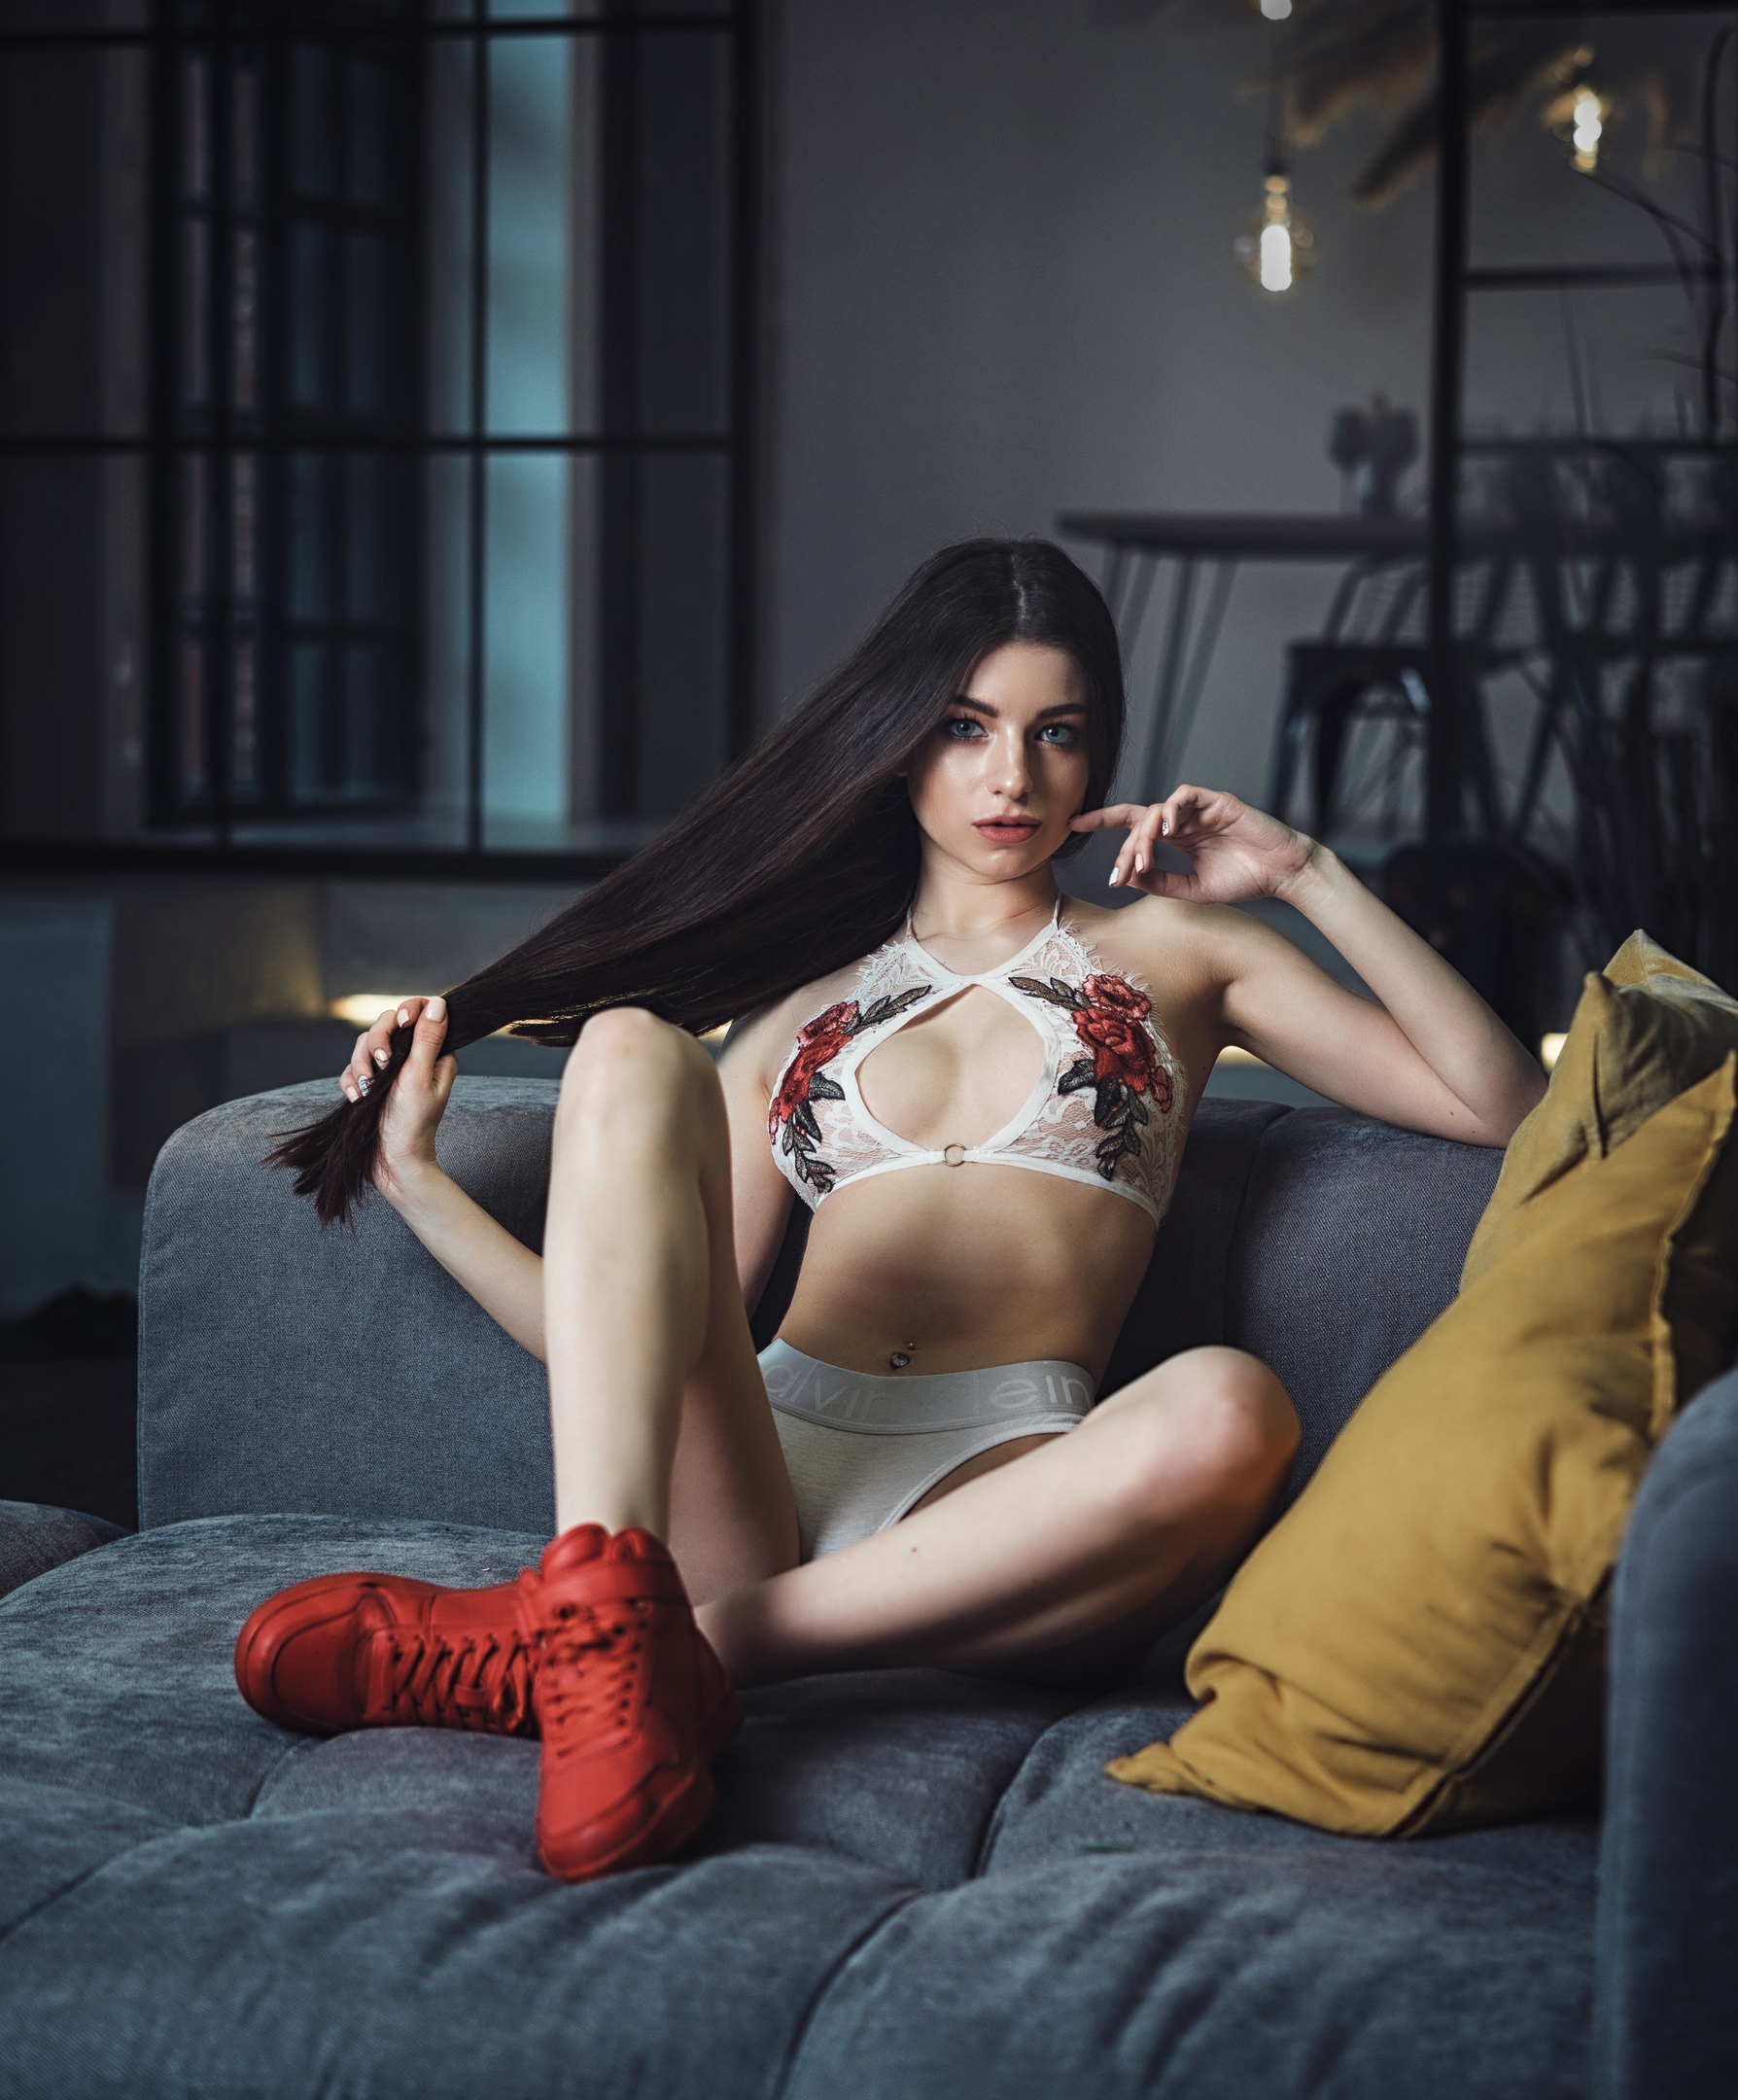 People 1788x2160 Anna Sazonova women model brunette long hair looking at viewer holding hair hair pulling lingerie bra cleavage panties Calvin Klein sneakers sitting couch cushions bokeh depth of field touching face indoors women indoors Russian women Russian gray eyes red shoes